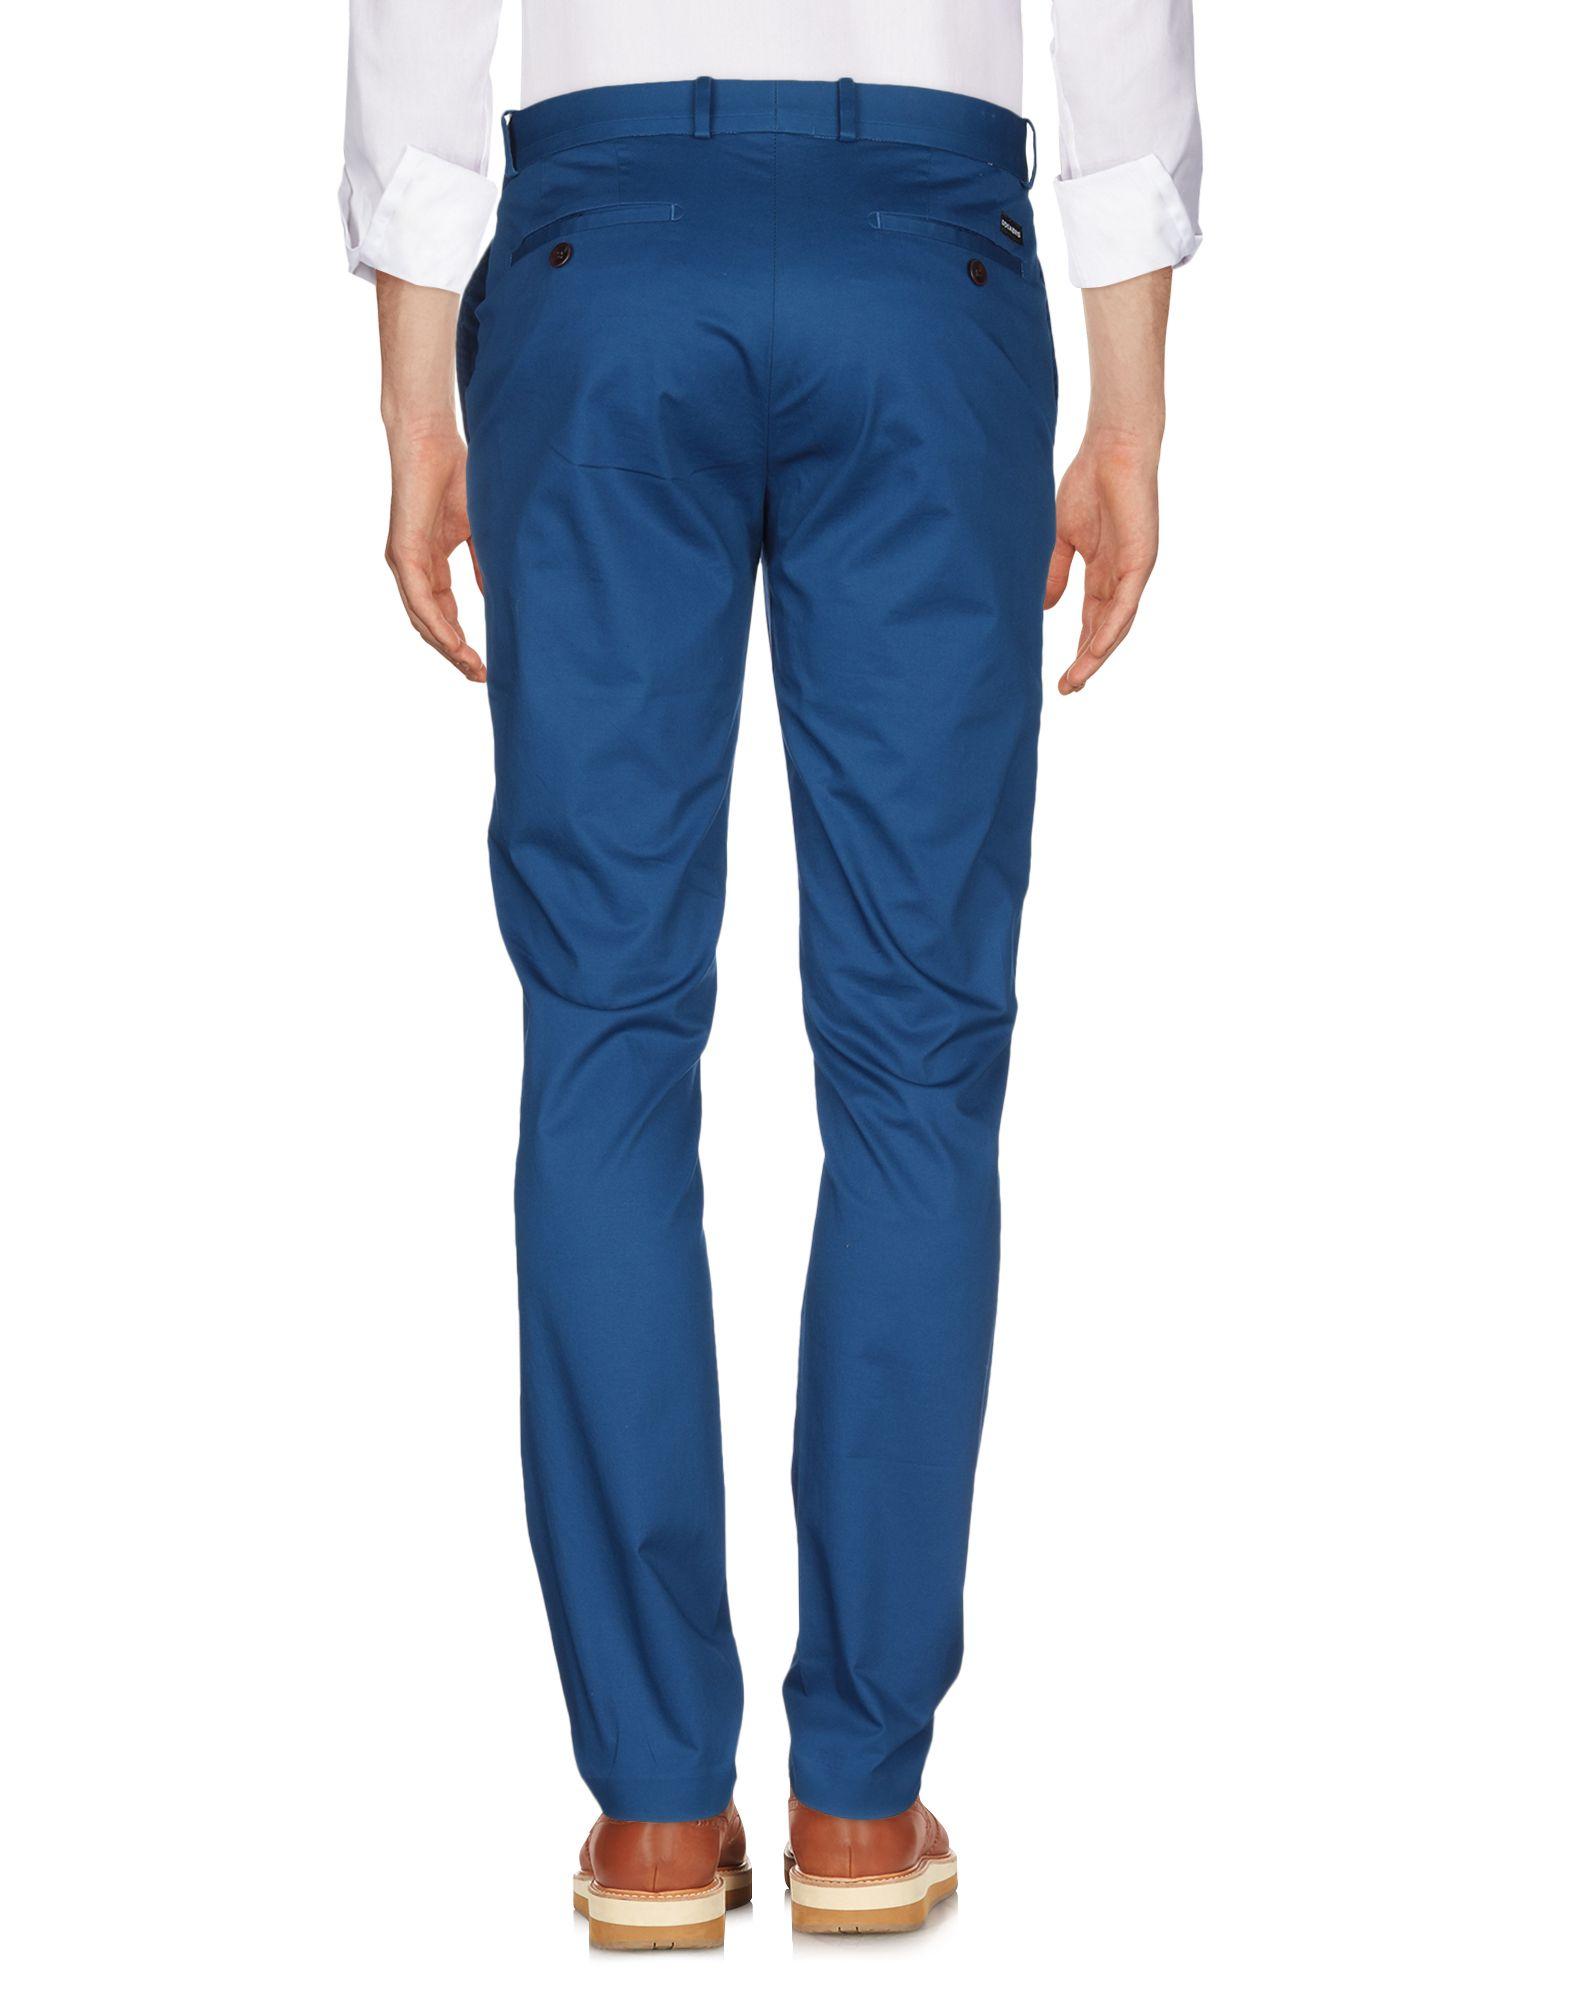 Dockers Cotton Casual Trouser in Blue for Men - Lyst